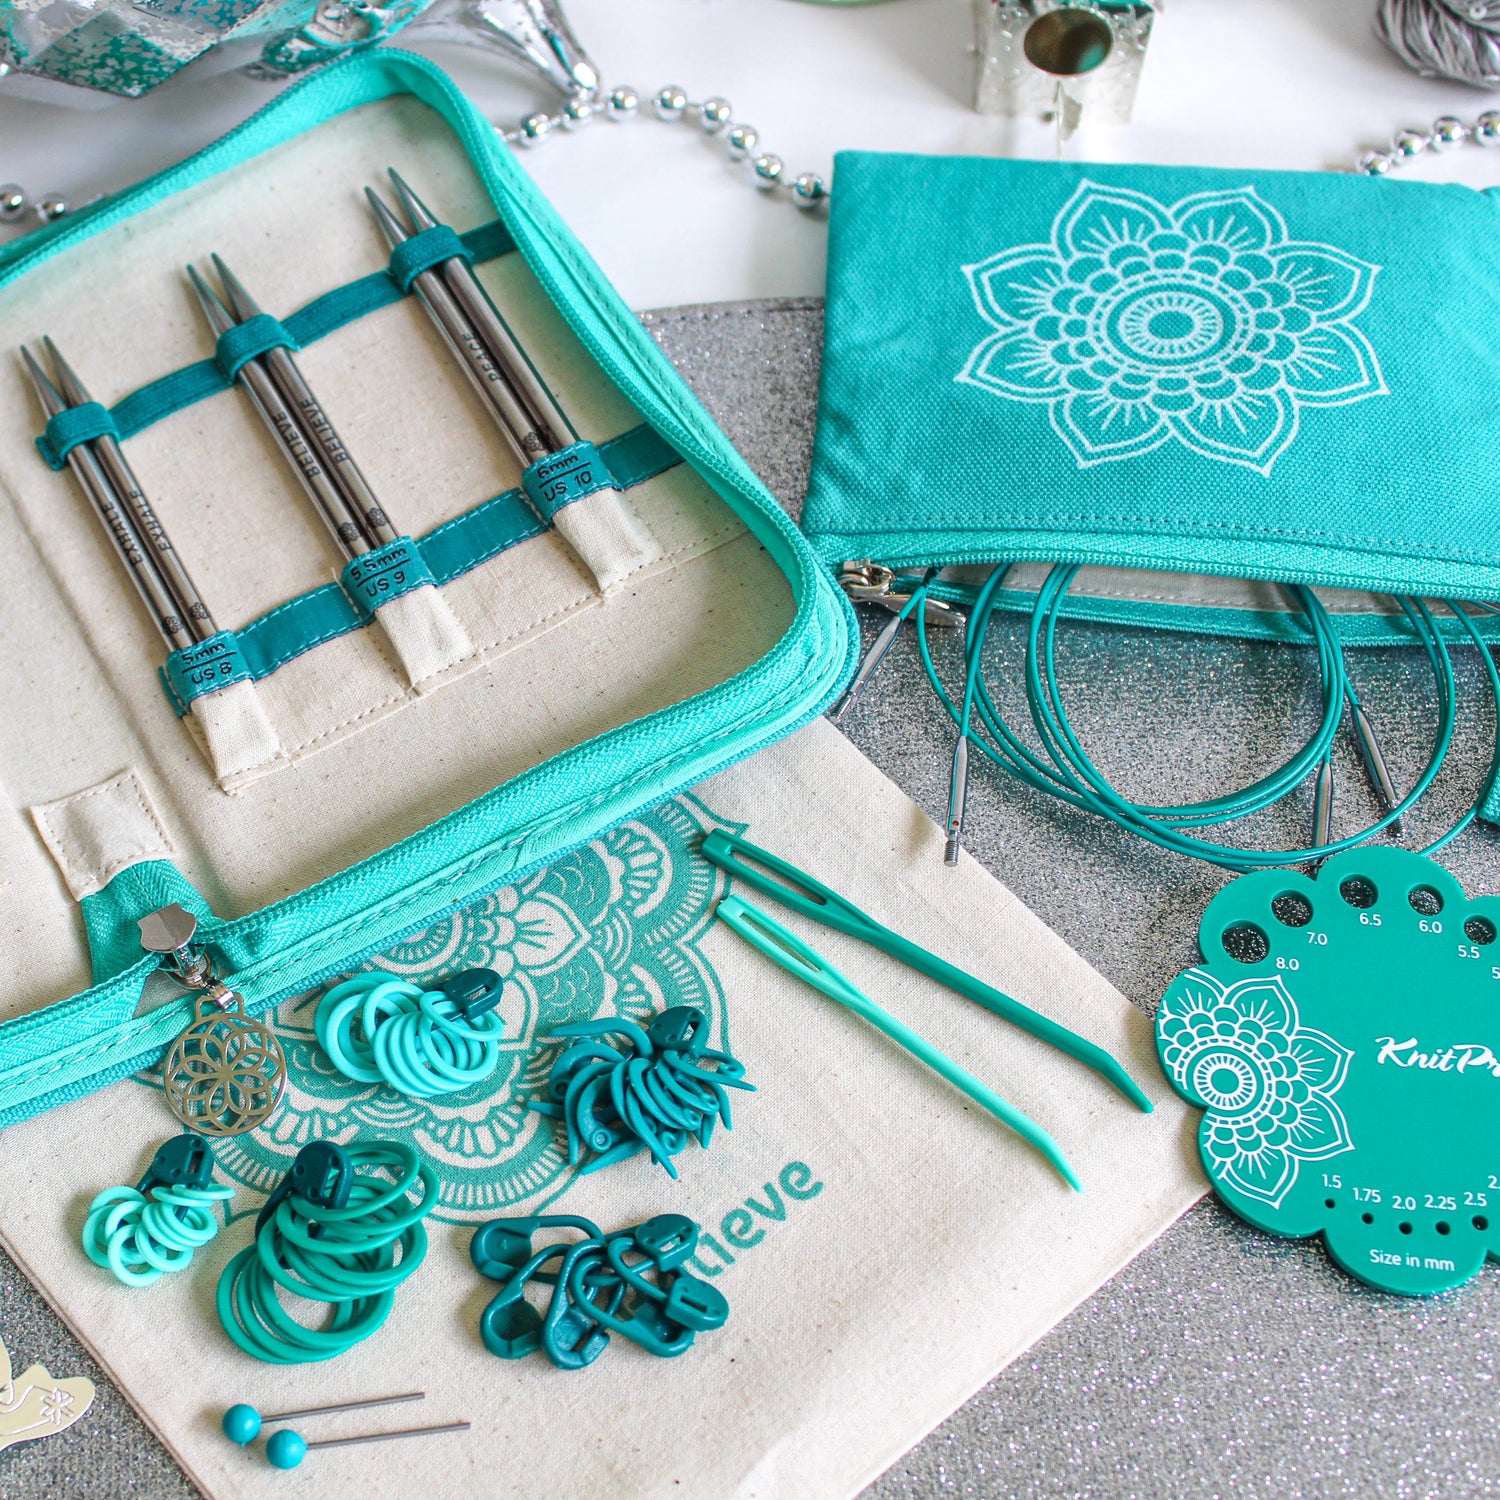 KnitPro celebrates the art of knitting with "The Mindful Collection" range of stylish knitting needles and accessories.